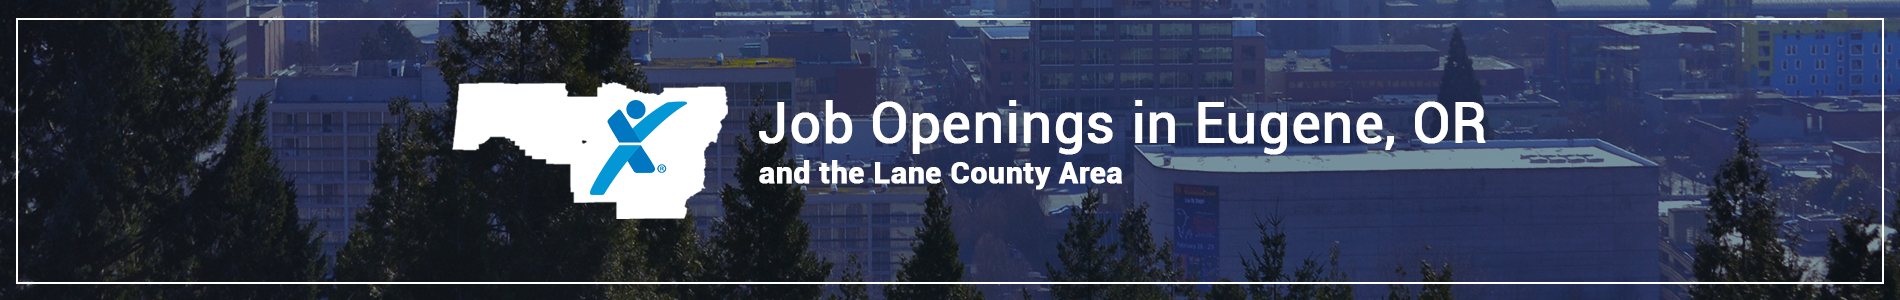 Find job openings in Eugene, OR with Express Employment Professionals today!